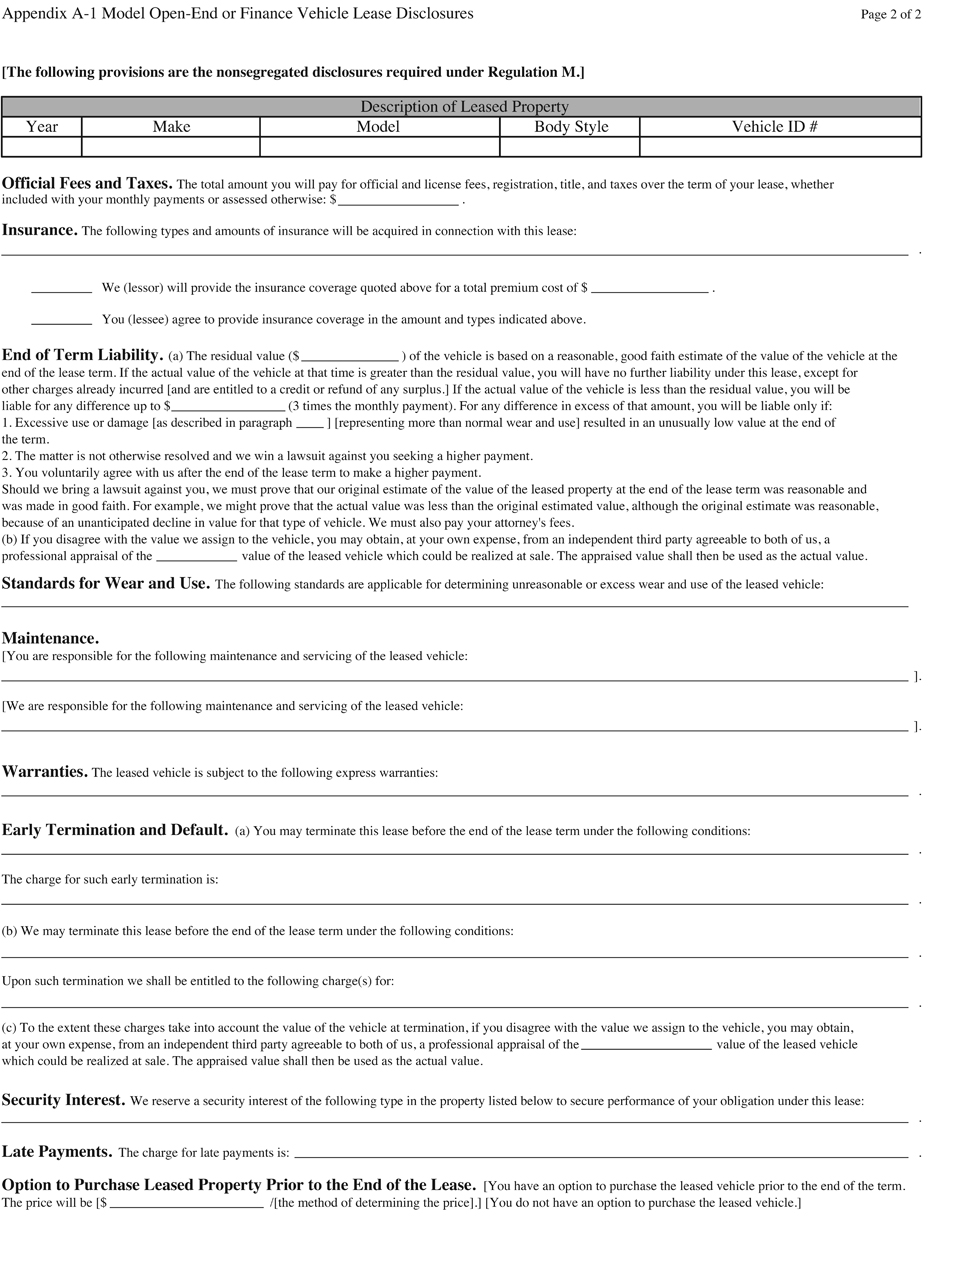 A-1—Model Open-End or Finance Vehicle Lease Disclosures Page 2